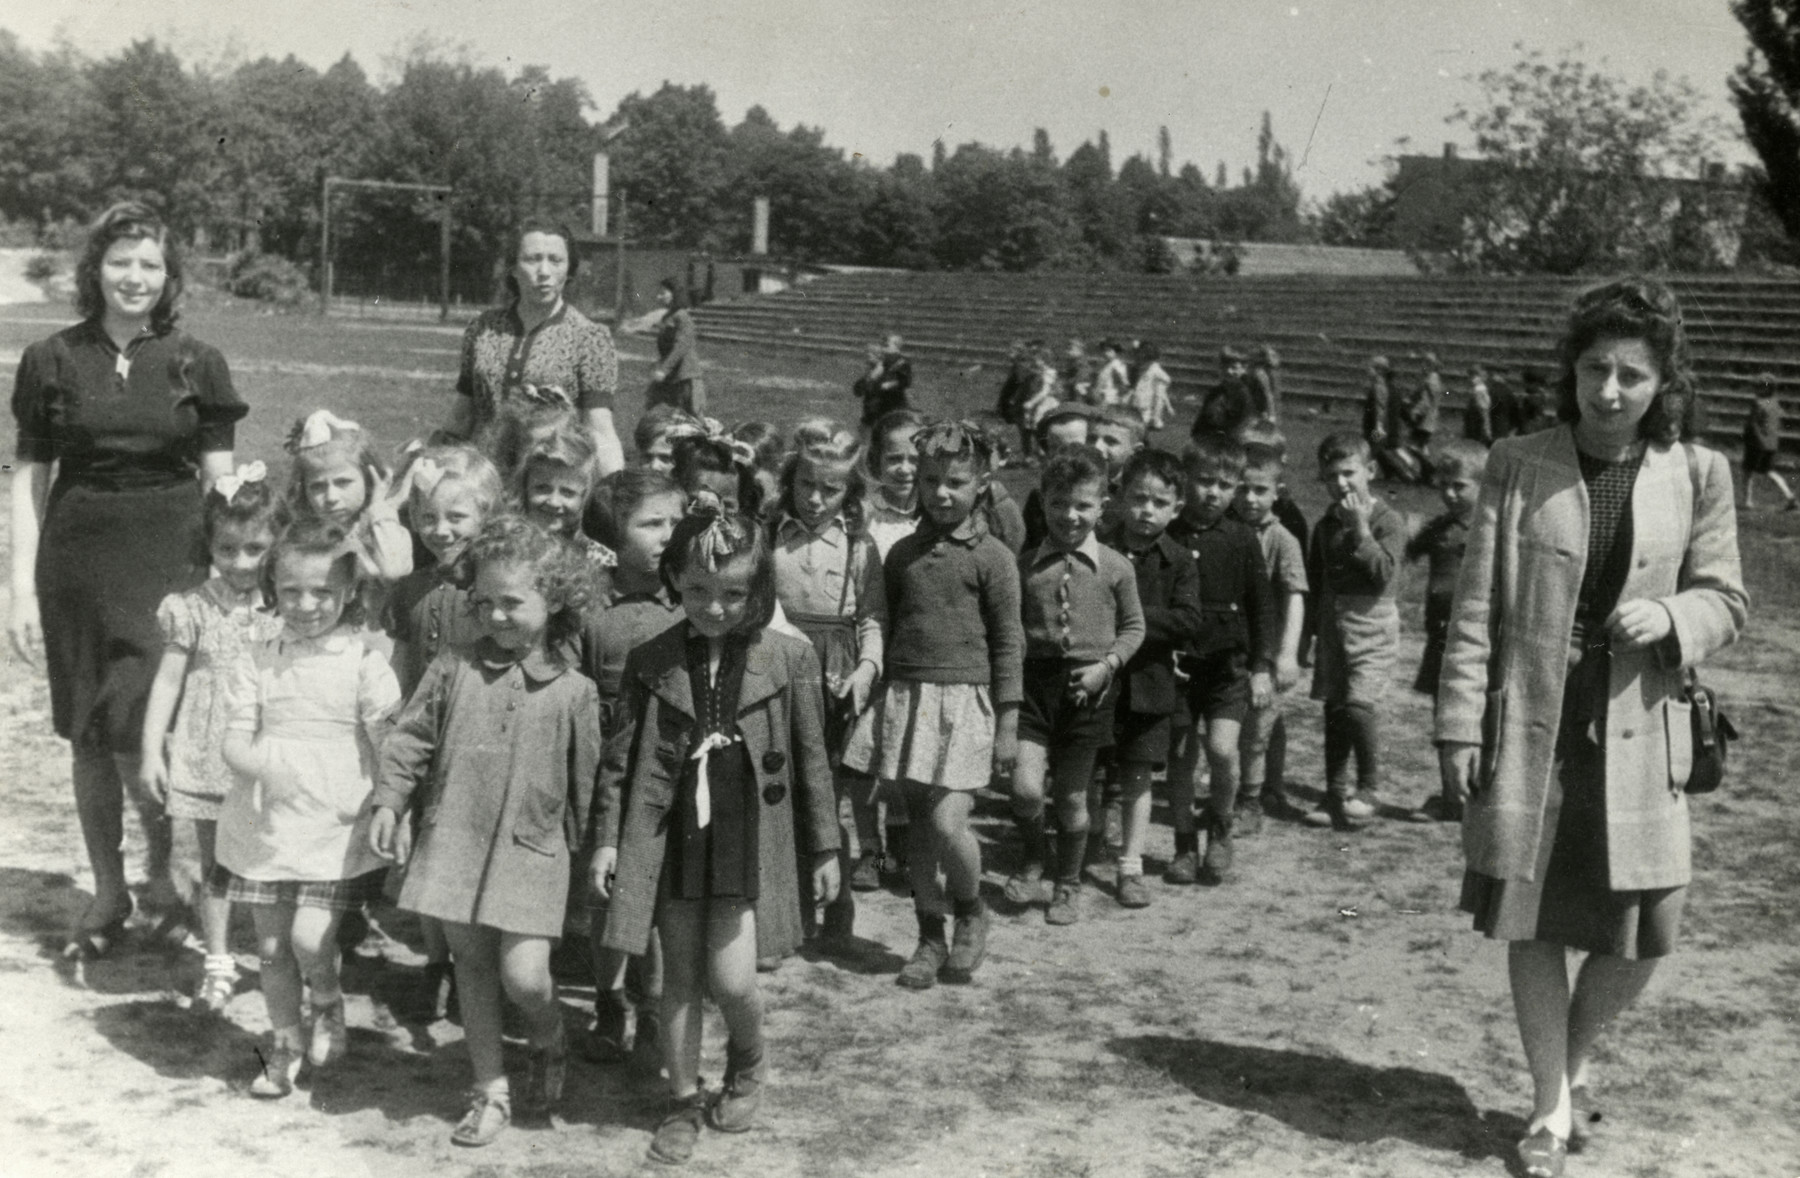 Group photograph of Bialik kindergarten class outing.  The location has been tentatively identified as the Mariendorf-Bialik Center, in the Volkspark Mariendorf. 

Eva Tabachnik is on right in front.